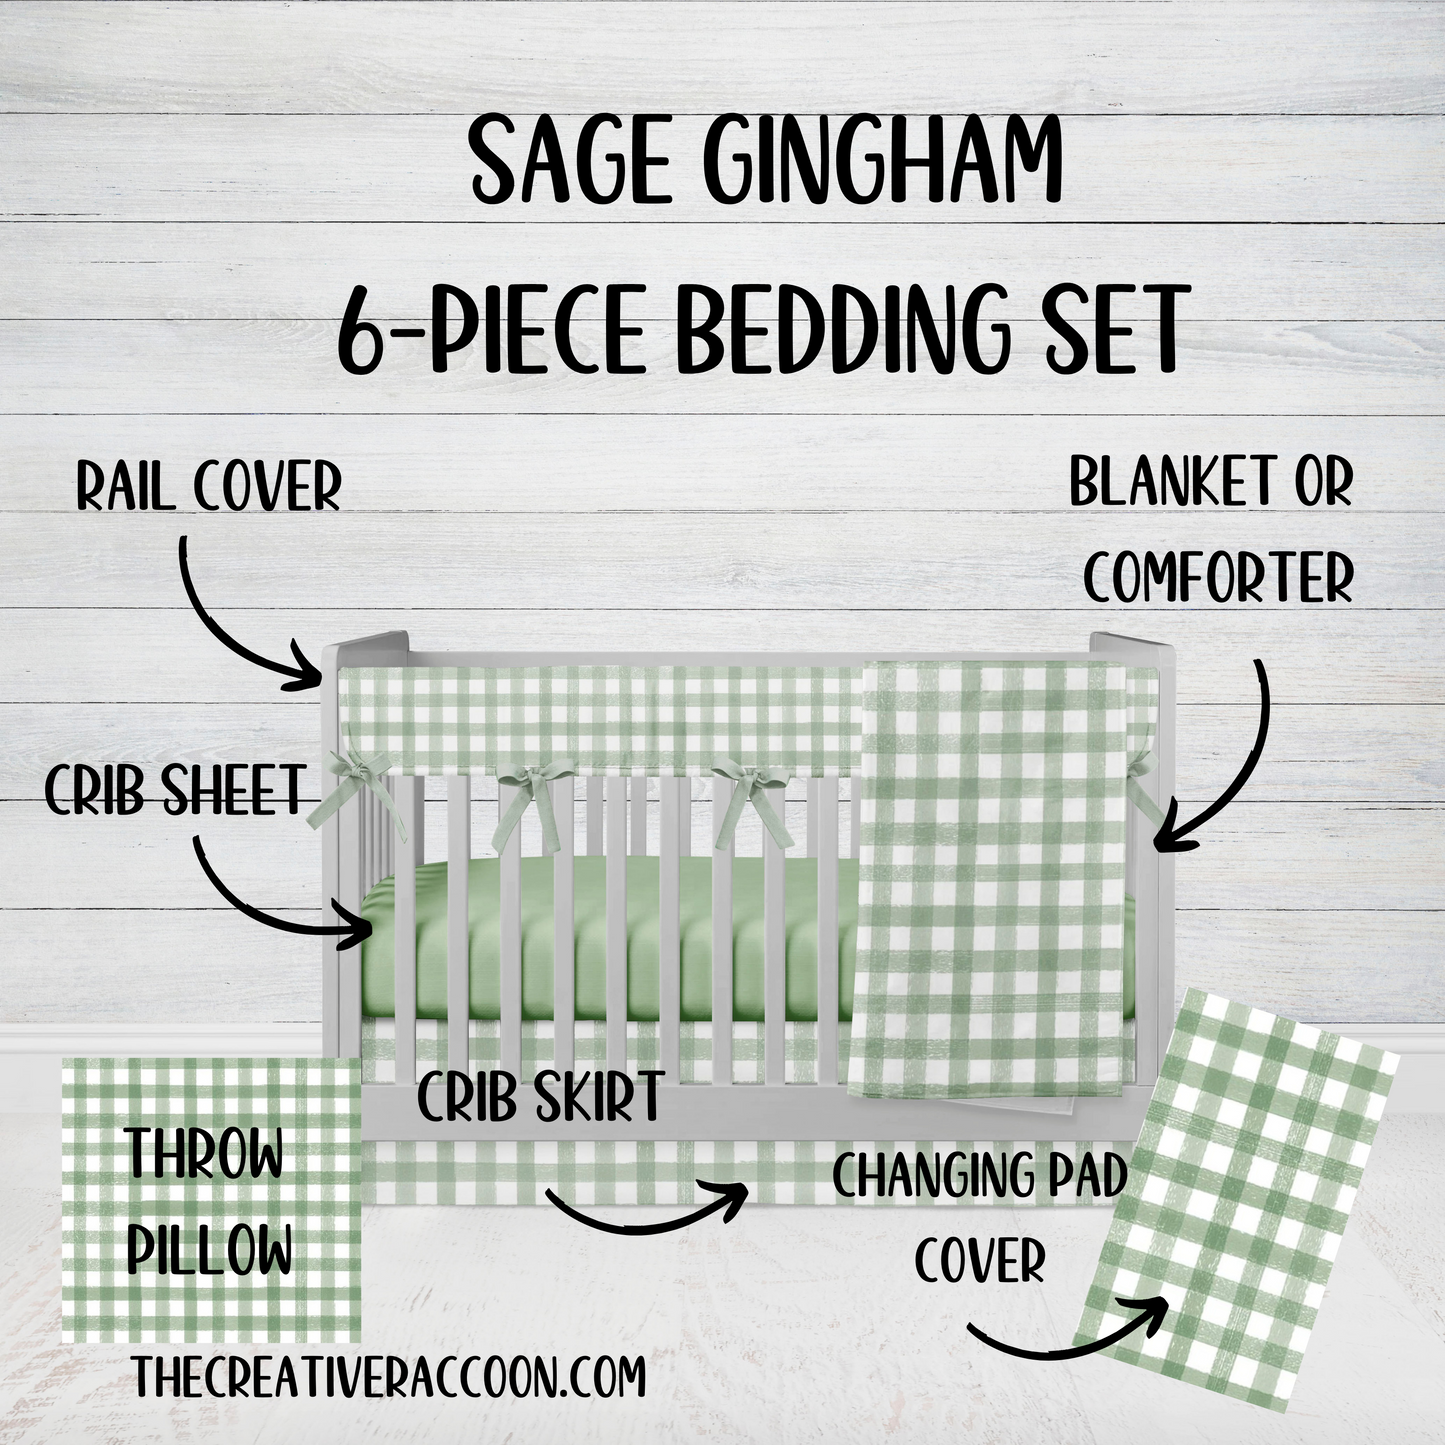 sage gingham check crib bedding set, shown in the 6-piece set with rail cover, sheet, crib skirt, changing pad cover, throw pillow & blanket or comforter